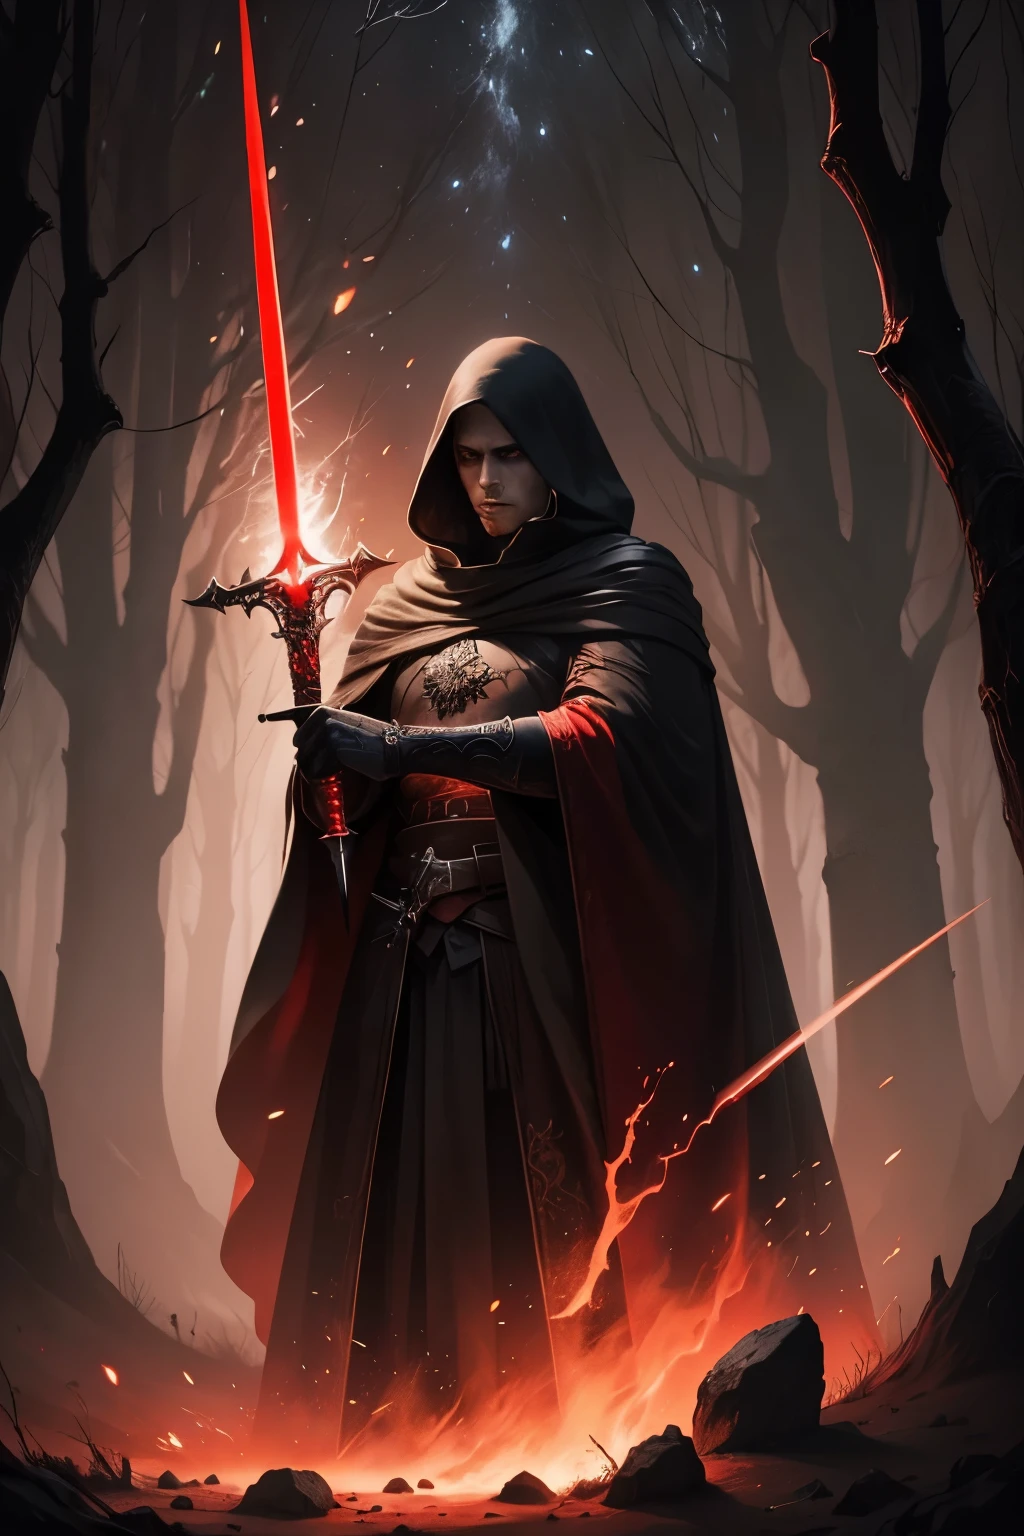 a man in a cloak holding a sword in a dark black and 赤 forest, 森の中で剣を握る, 光る剣 (赤),ダークファンタジースタイル art, ダークファンタジーアートwork, 8k ファンタジーアート, ダークファンタジースタイル, 4Kファンタジーアート, 壮大なファンタジーアートスタイルHD, ダークファンタジーアート, ダークファンタジーコンセプトアート, デジタルアートスタイルの壮大なファンタジー, in style of ダークファンタジーアート, 光る剣 in hand